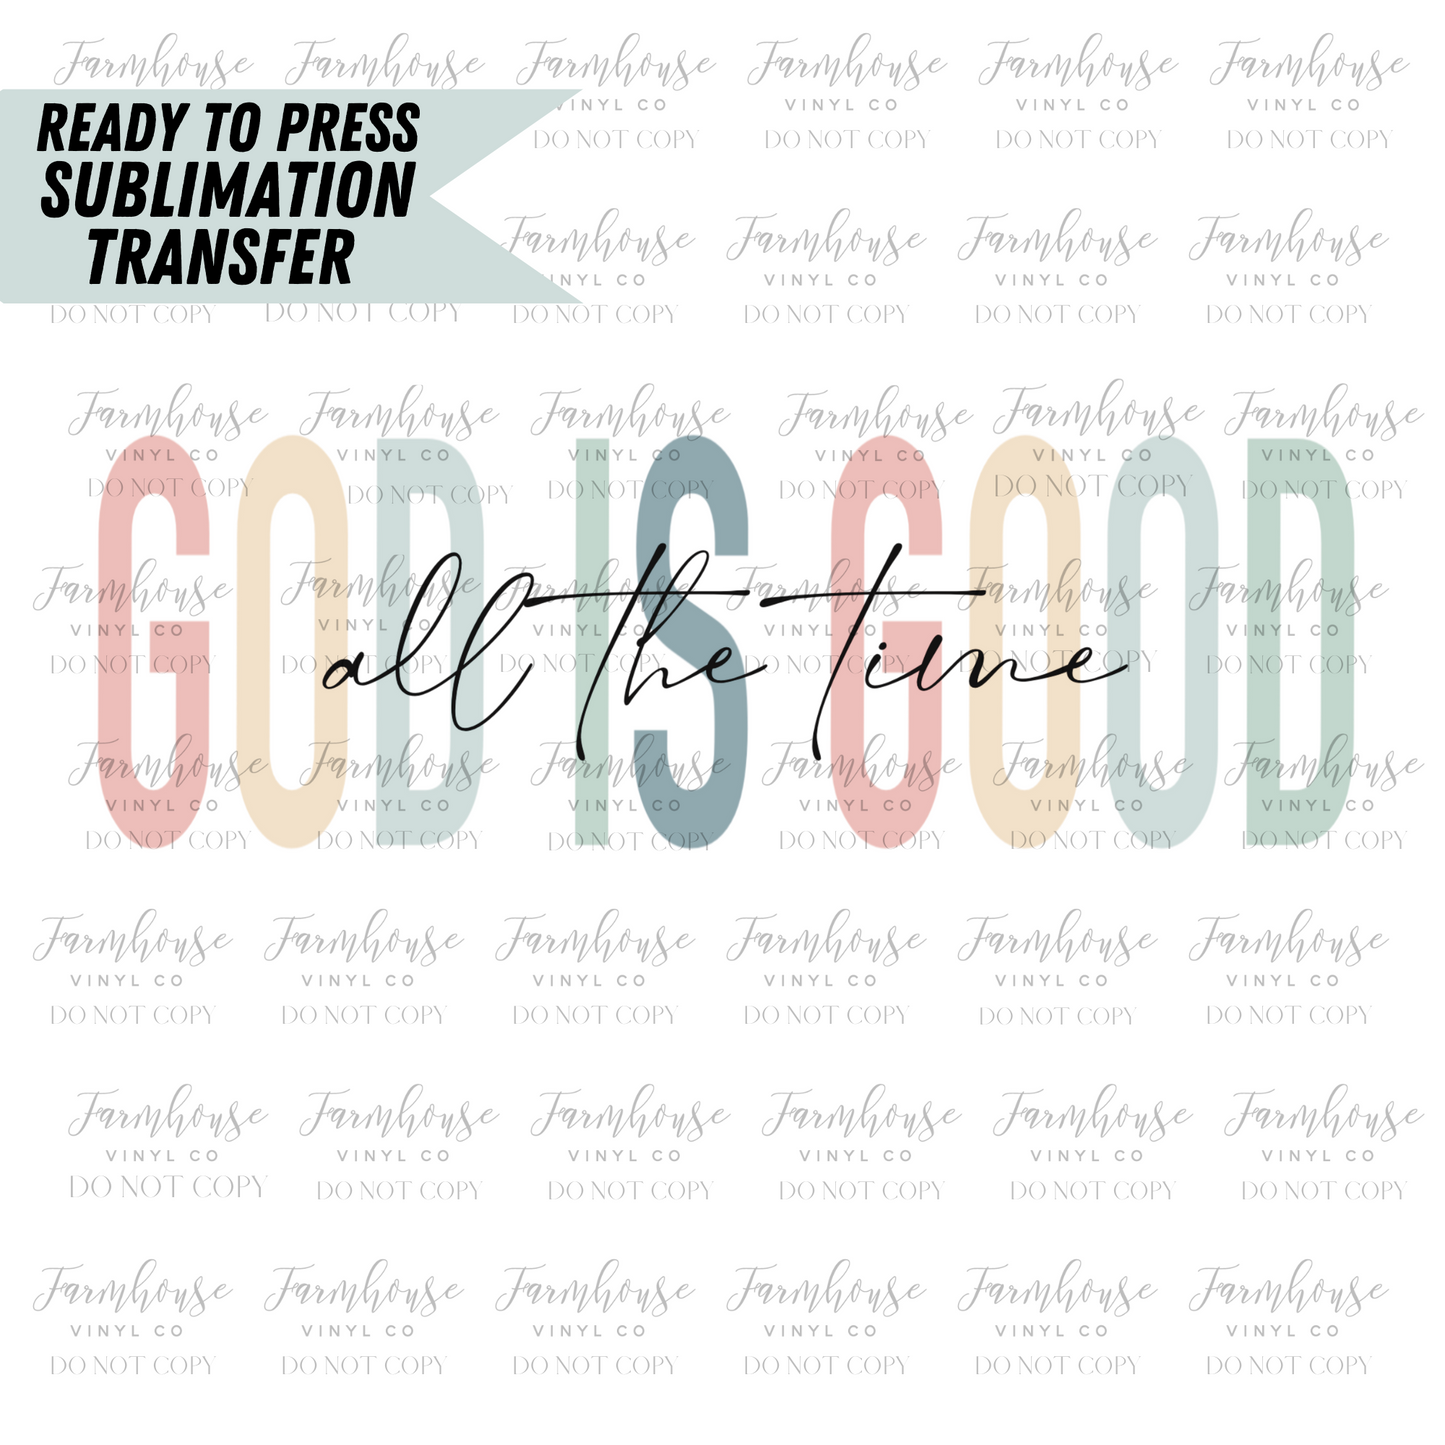 God Is Good All The Time Ready To Press Sublimation Transfer